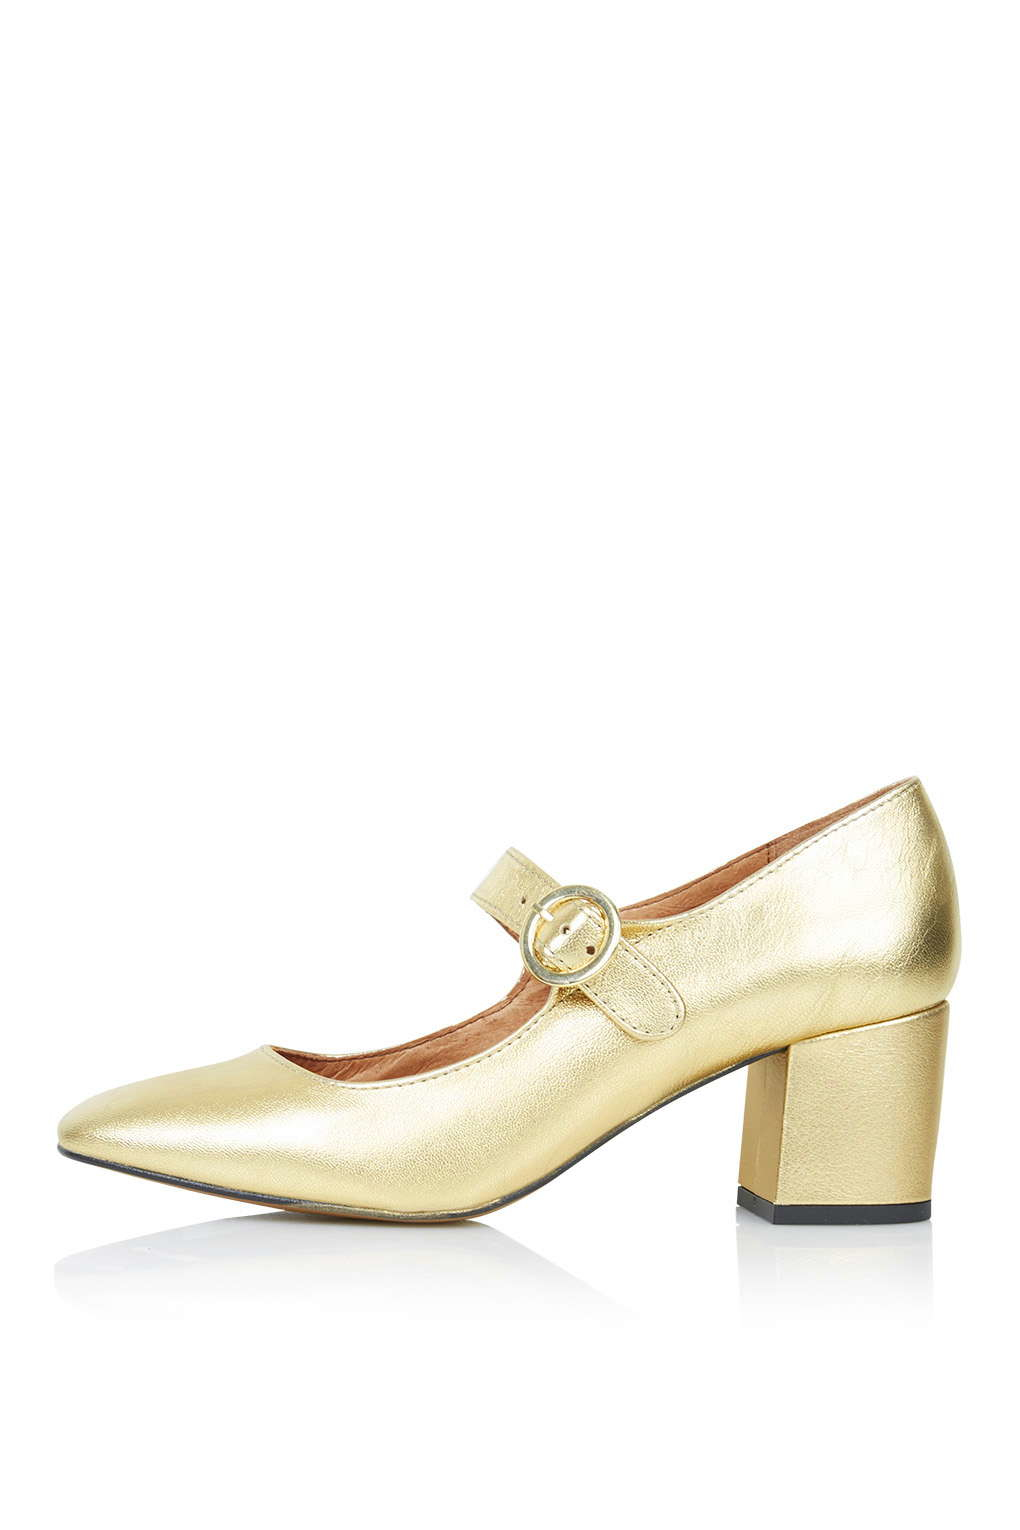 gold mary janes womens